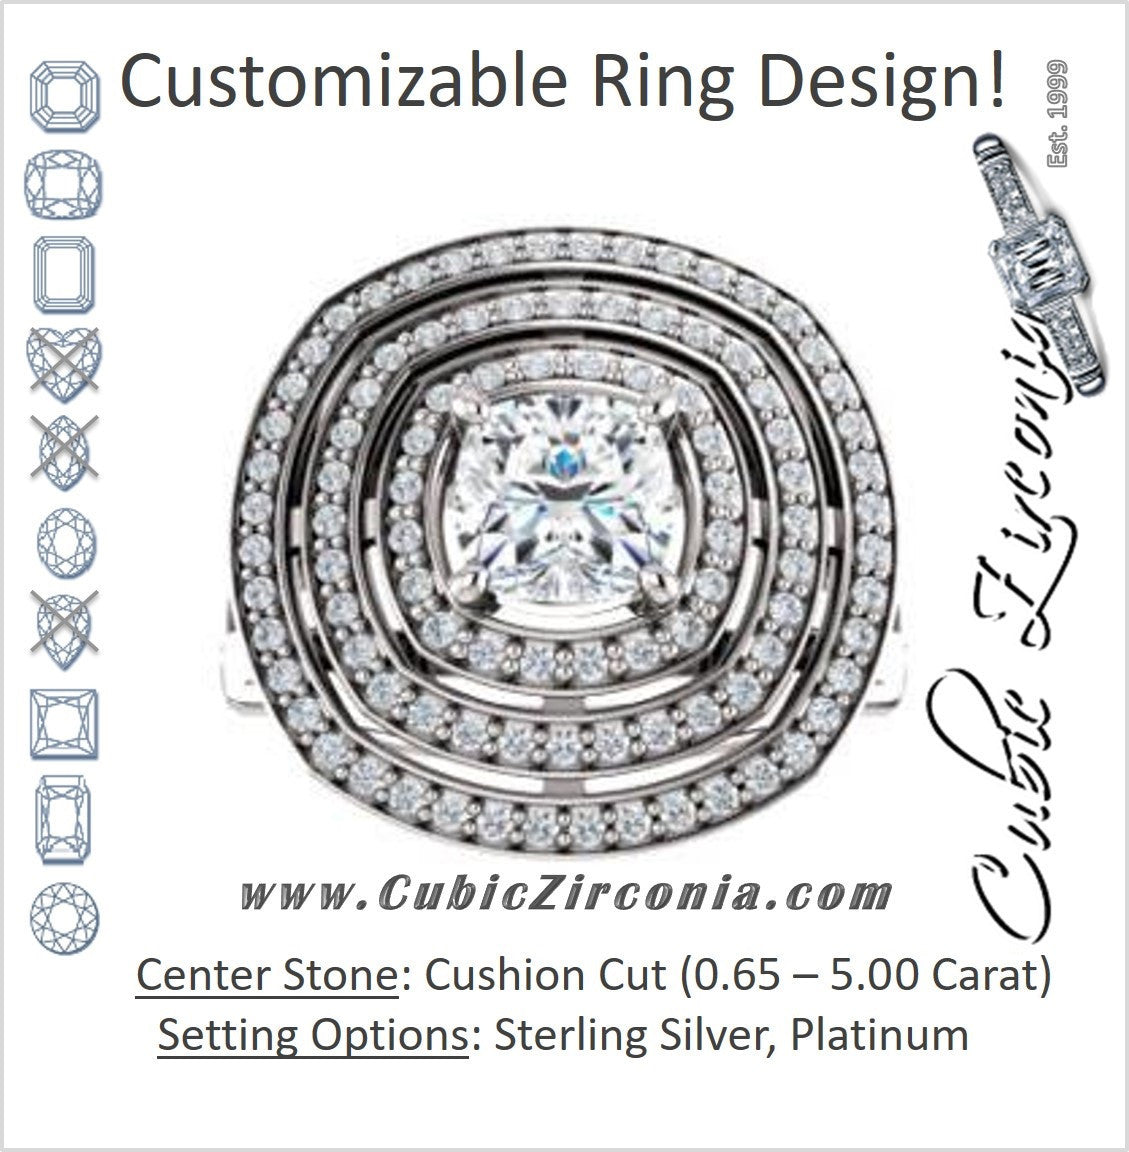 Cubic Zirconia Engagement Ring- The Roza (Customizable Triple-Halo Cushion Cut Design with Split Band and Knuckle Accents)